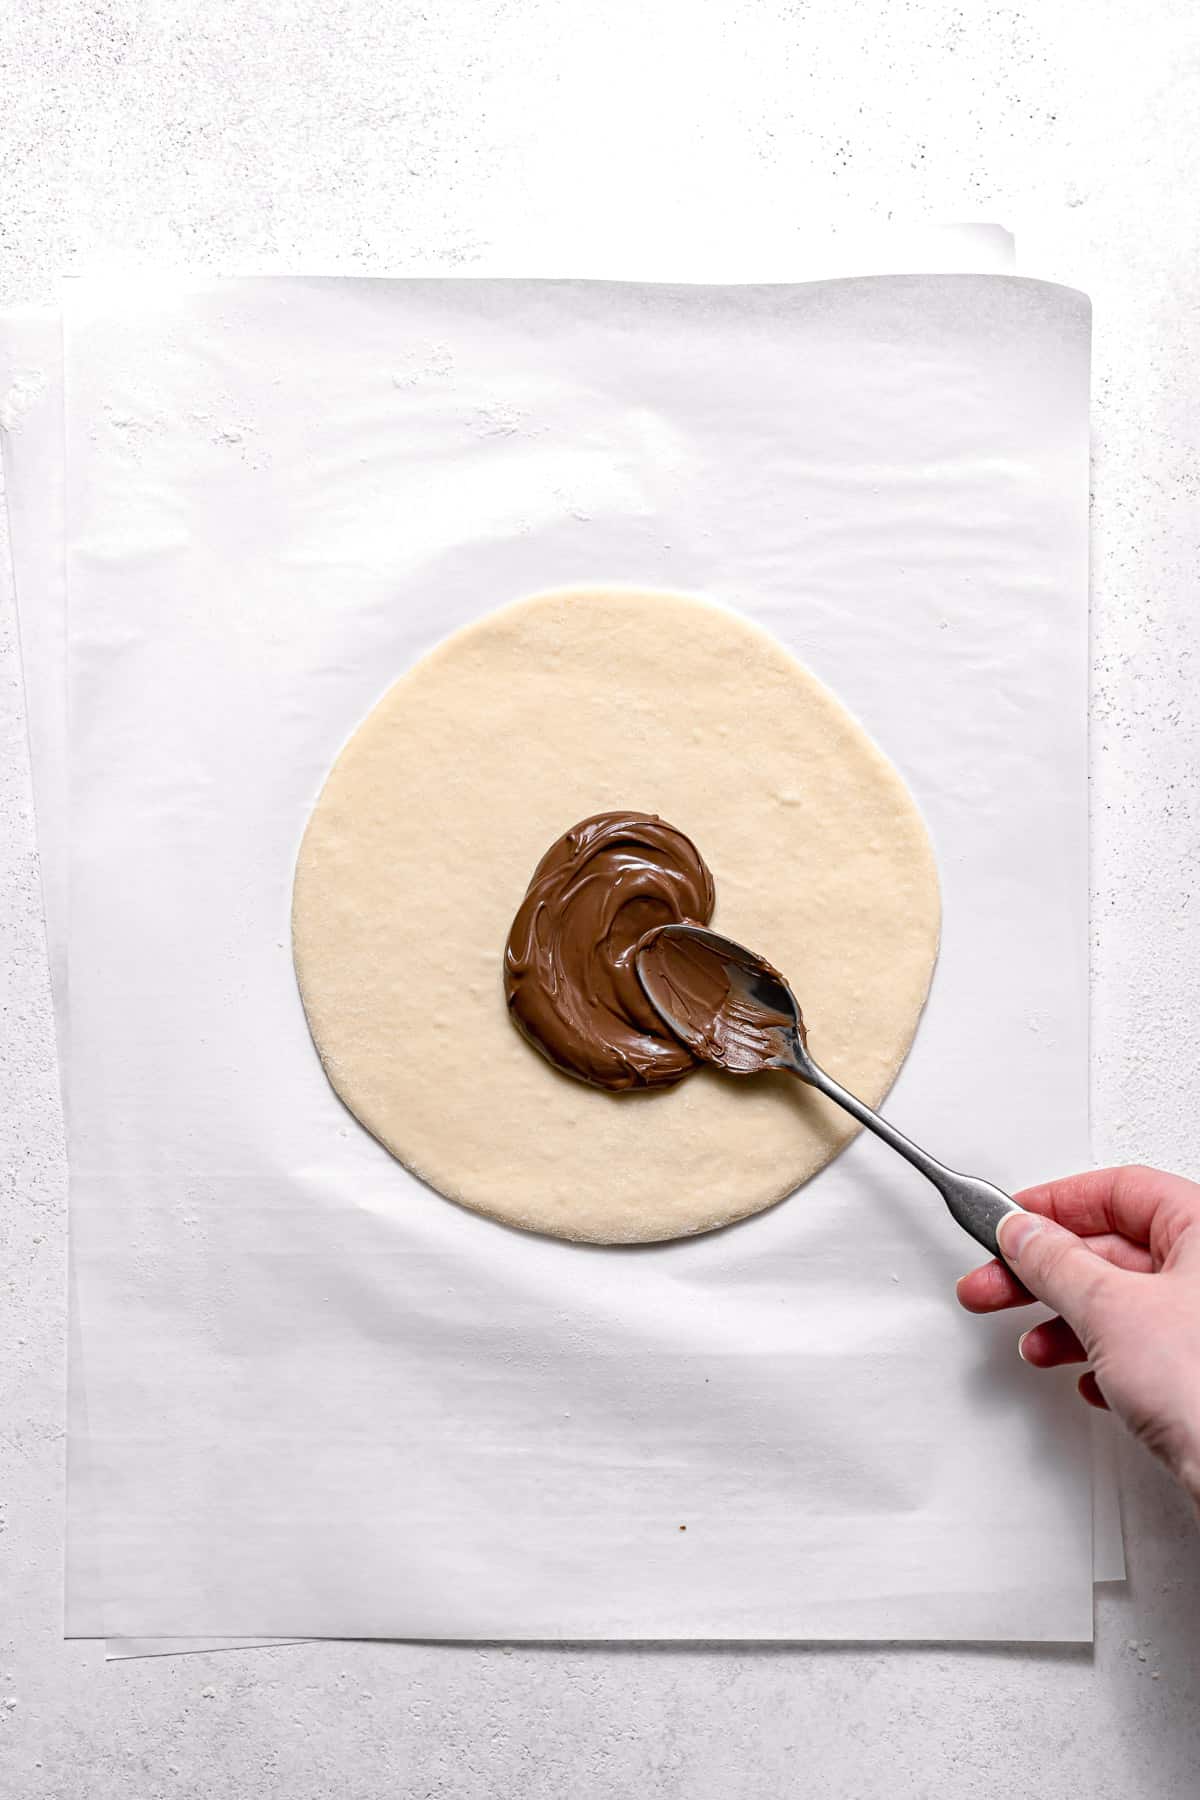 nutella being spread onto first dough layer